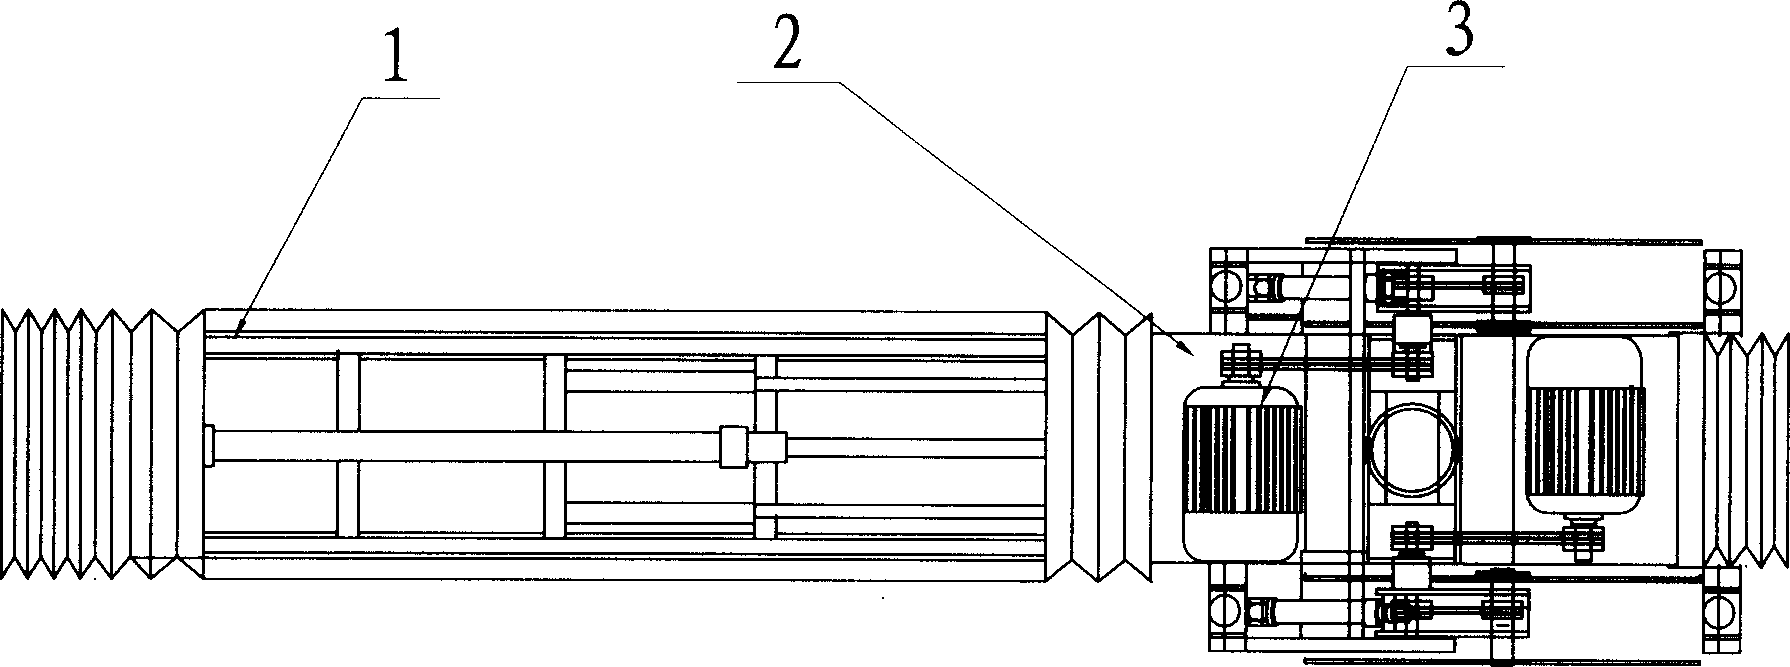 Technique for mining specified dimension stone in stone quarry directly and cutting apparatus